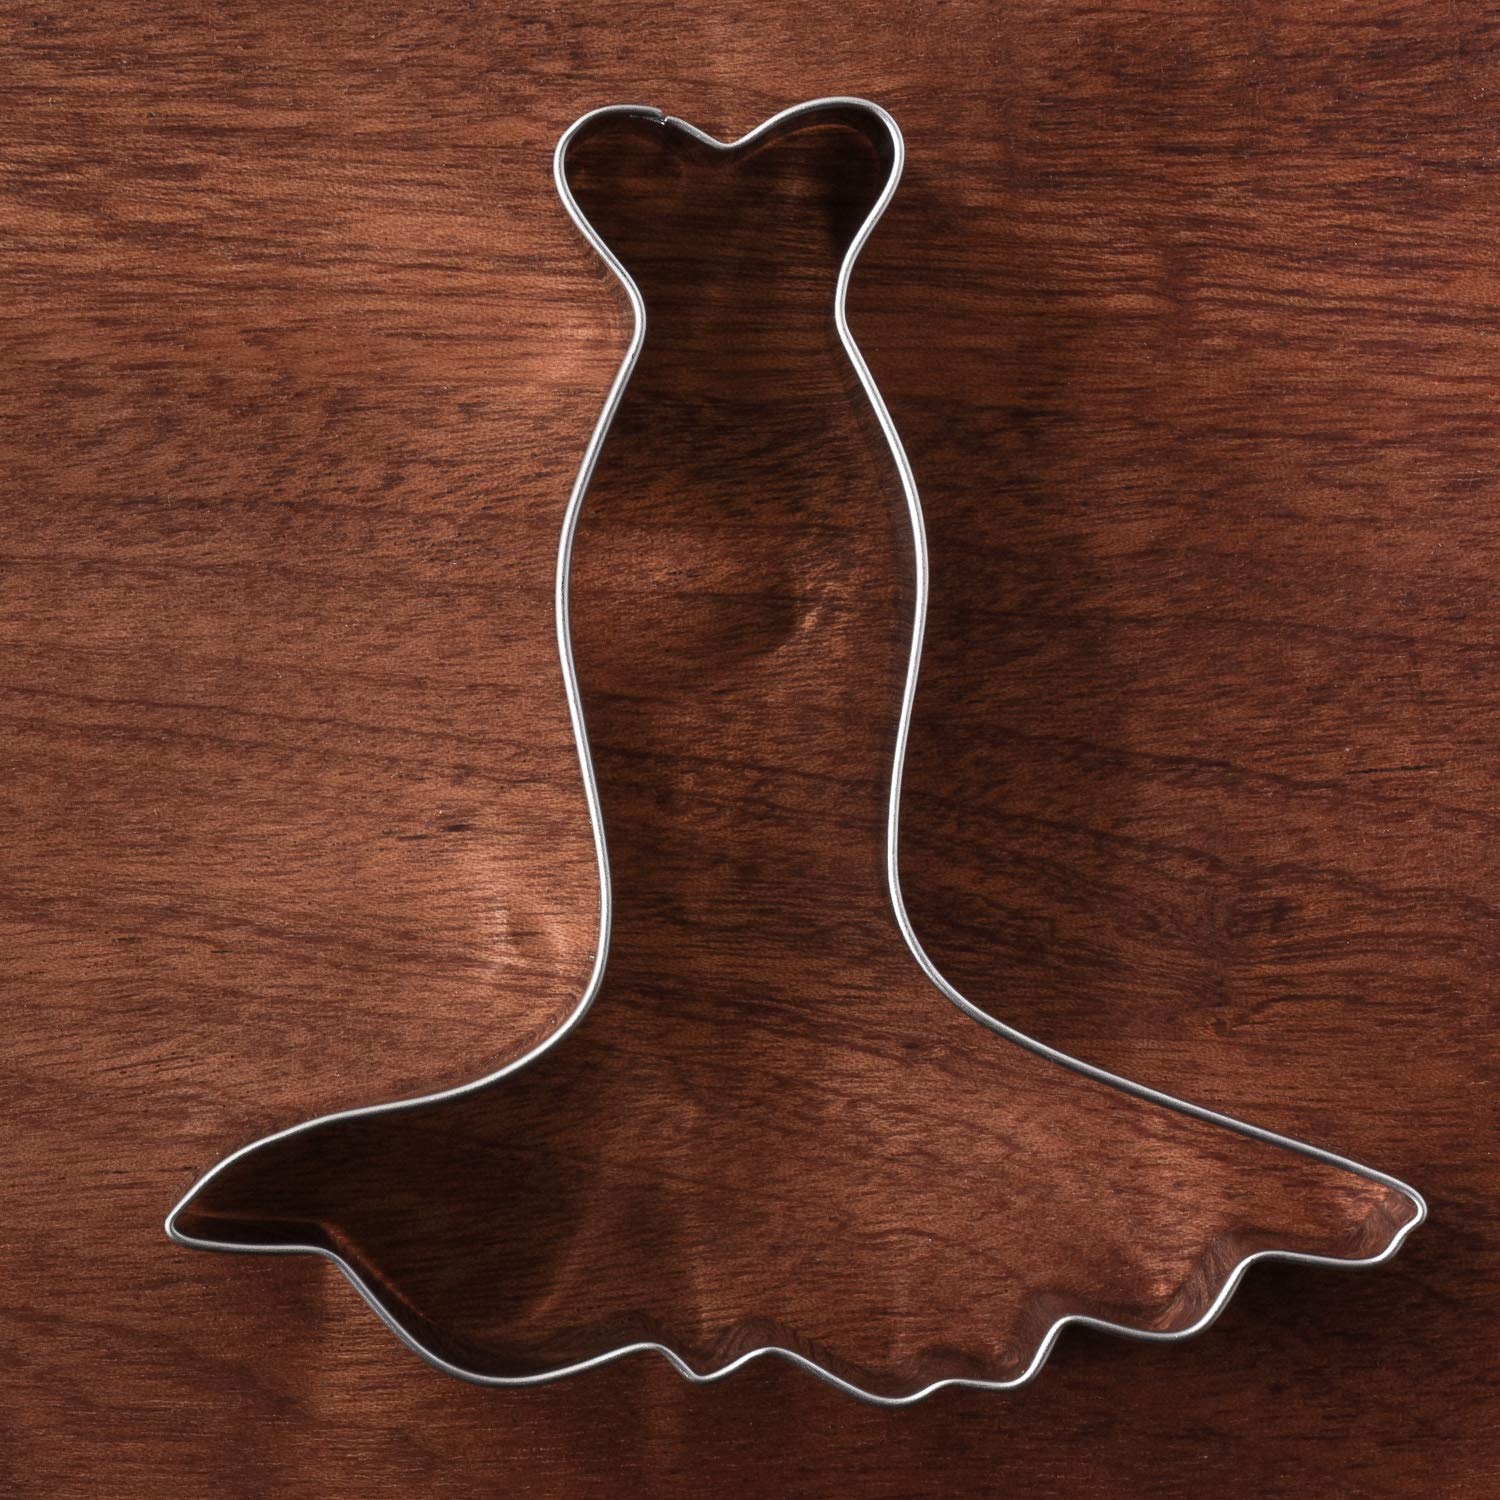 LILIAO Wedding Dress Cookie Cutter for Wedding/Engagement - 4 x 4.3 inches - Stainless Steel